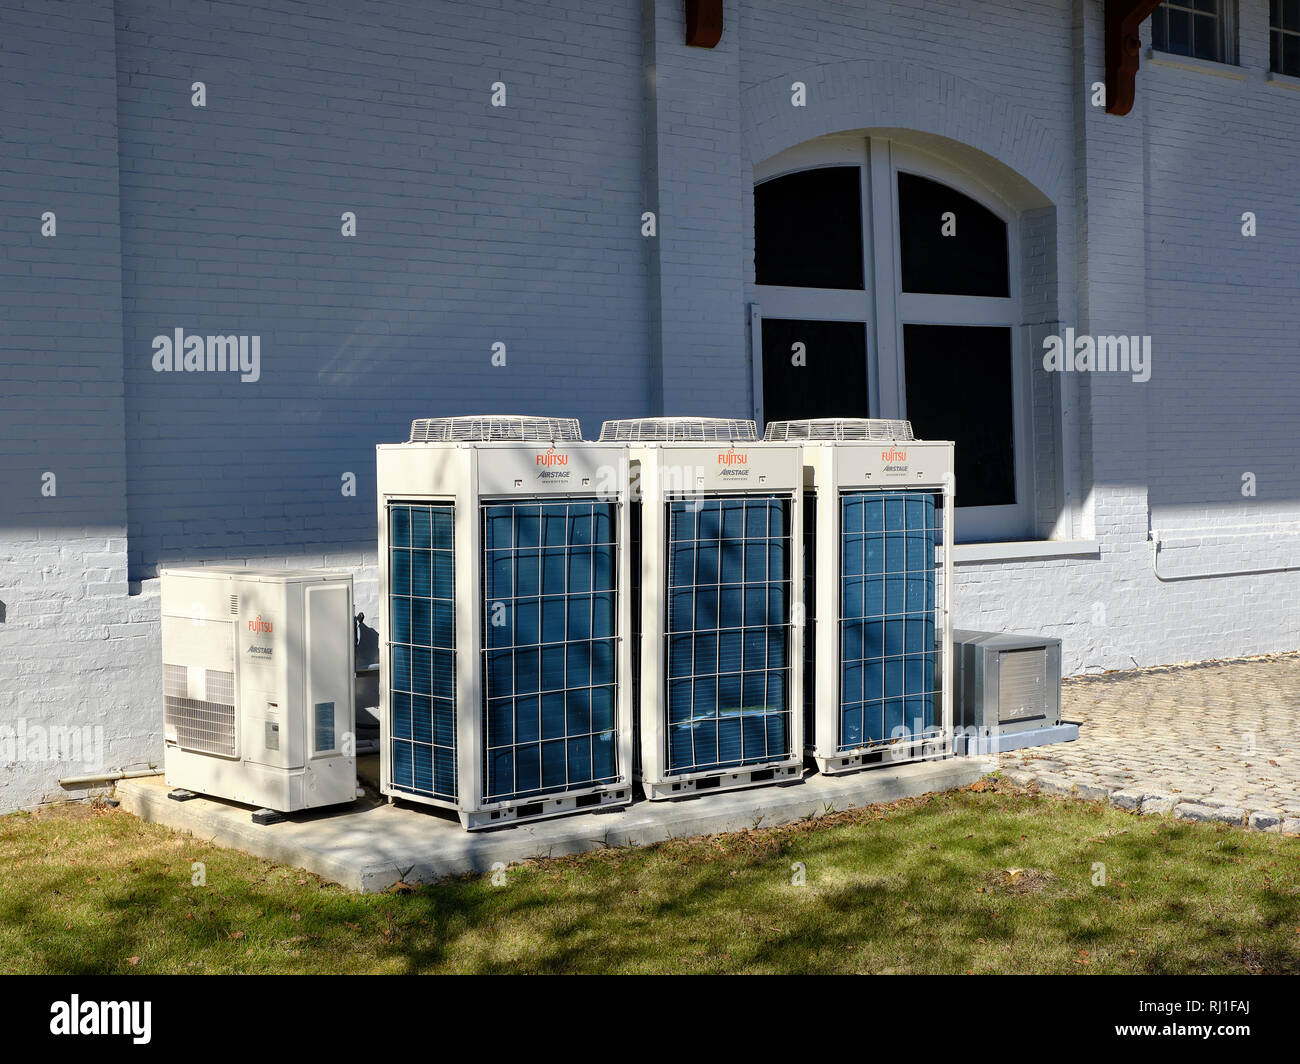 Multiple Fuji Airstage Inverter or heat pump units used to heat and cool a commercial building in Montgomery Alabama, USA. Stock Photo